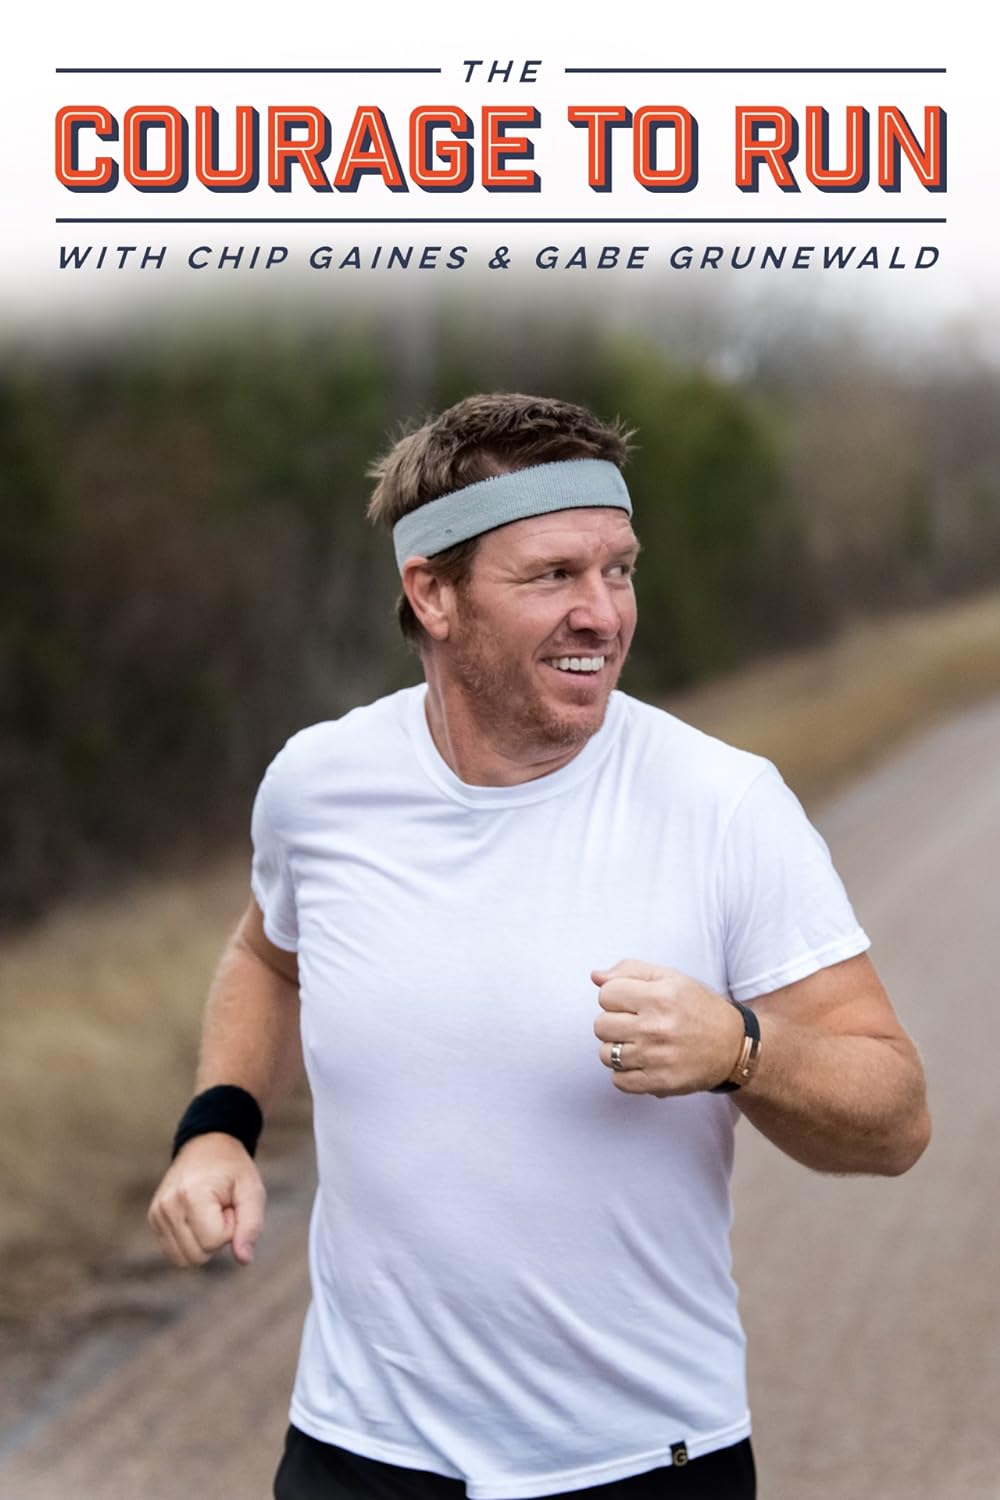 The Courage to Run with Chip Gaines and Gabe Grunewald